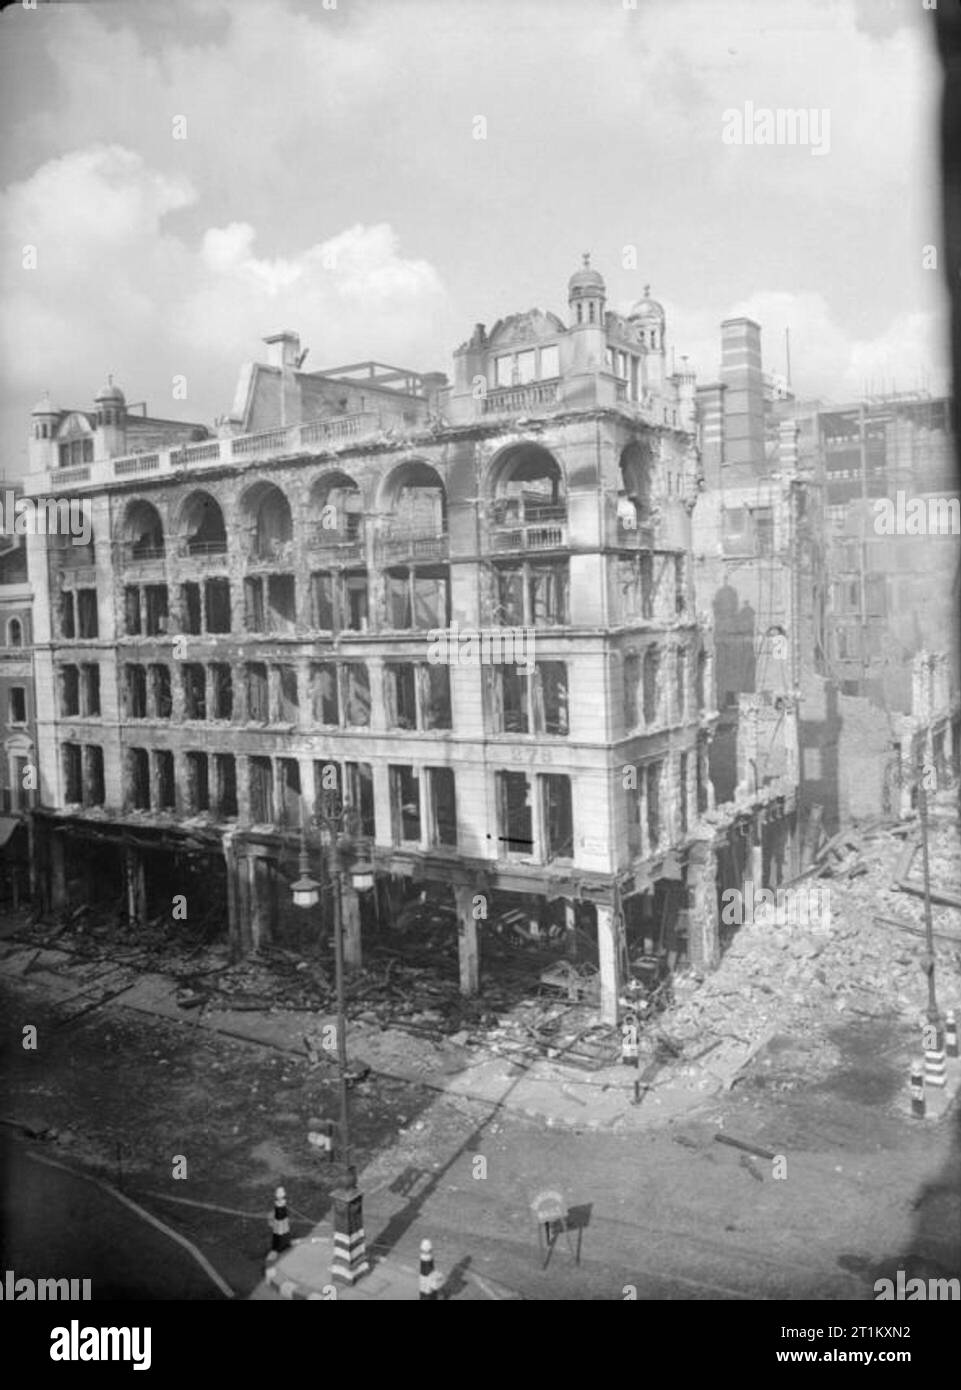 Bombs Hit London Stores- Air Raid Damage in London, England, 1940 A wide view of the bomb-damaged shell of the John Lewis department store on London's Oxford Street, following an air raid in September 1940. Stock Photo